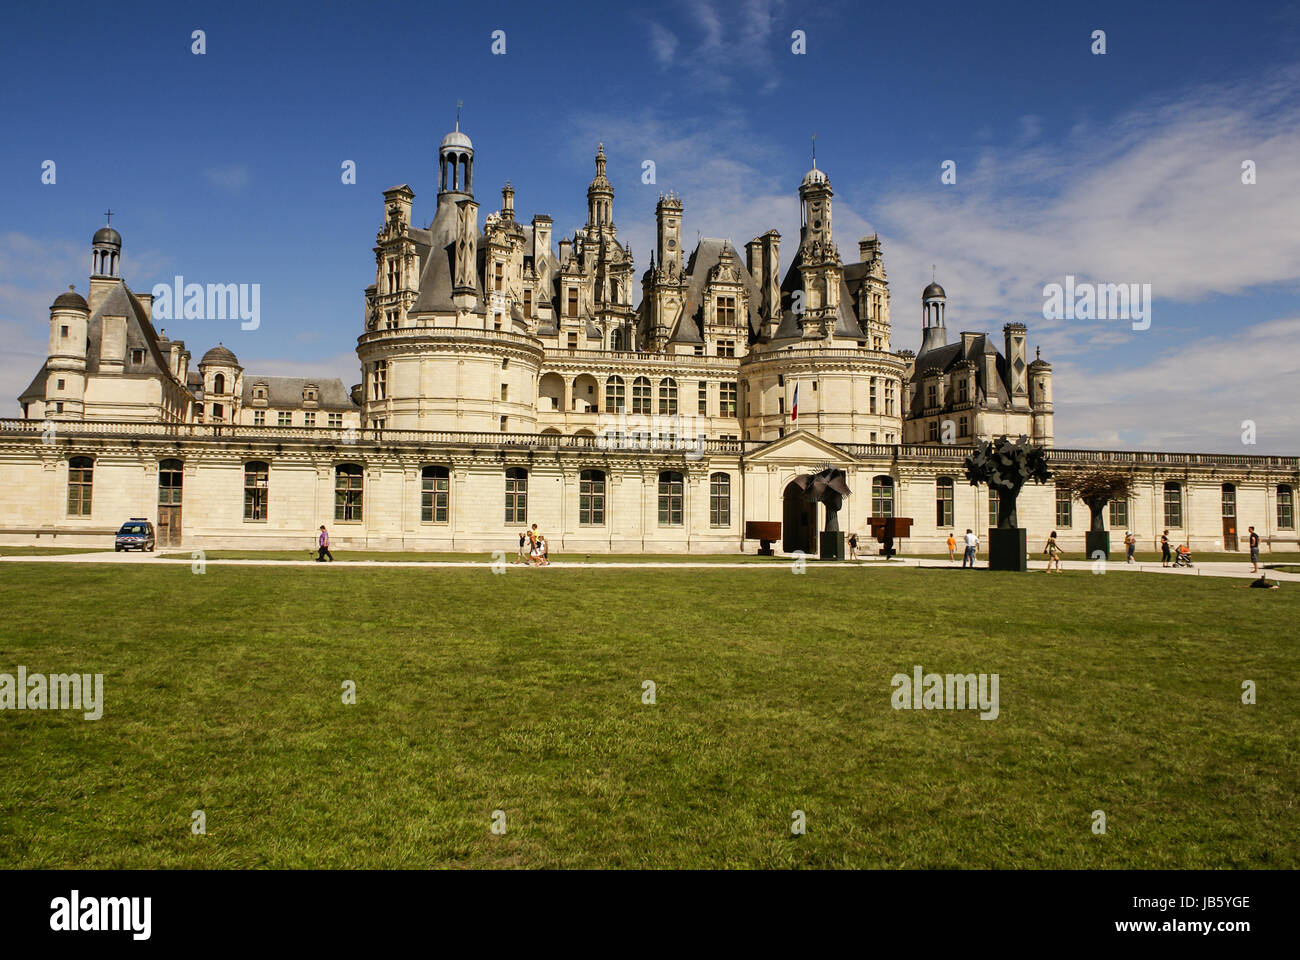 Chambord castle is located in Loir-et-Cher, France. It has a very distinct French Renaissance architecture which blends traditional French medieval Stock Photo